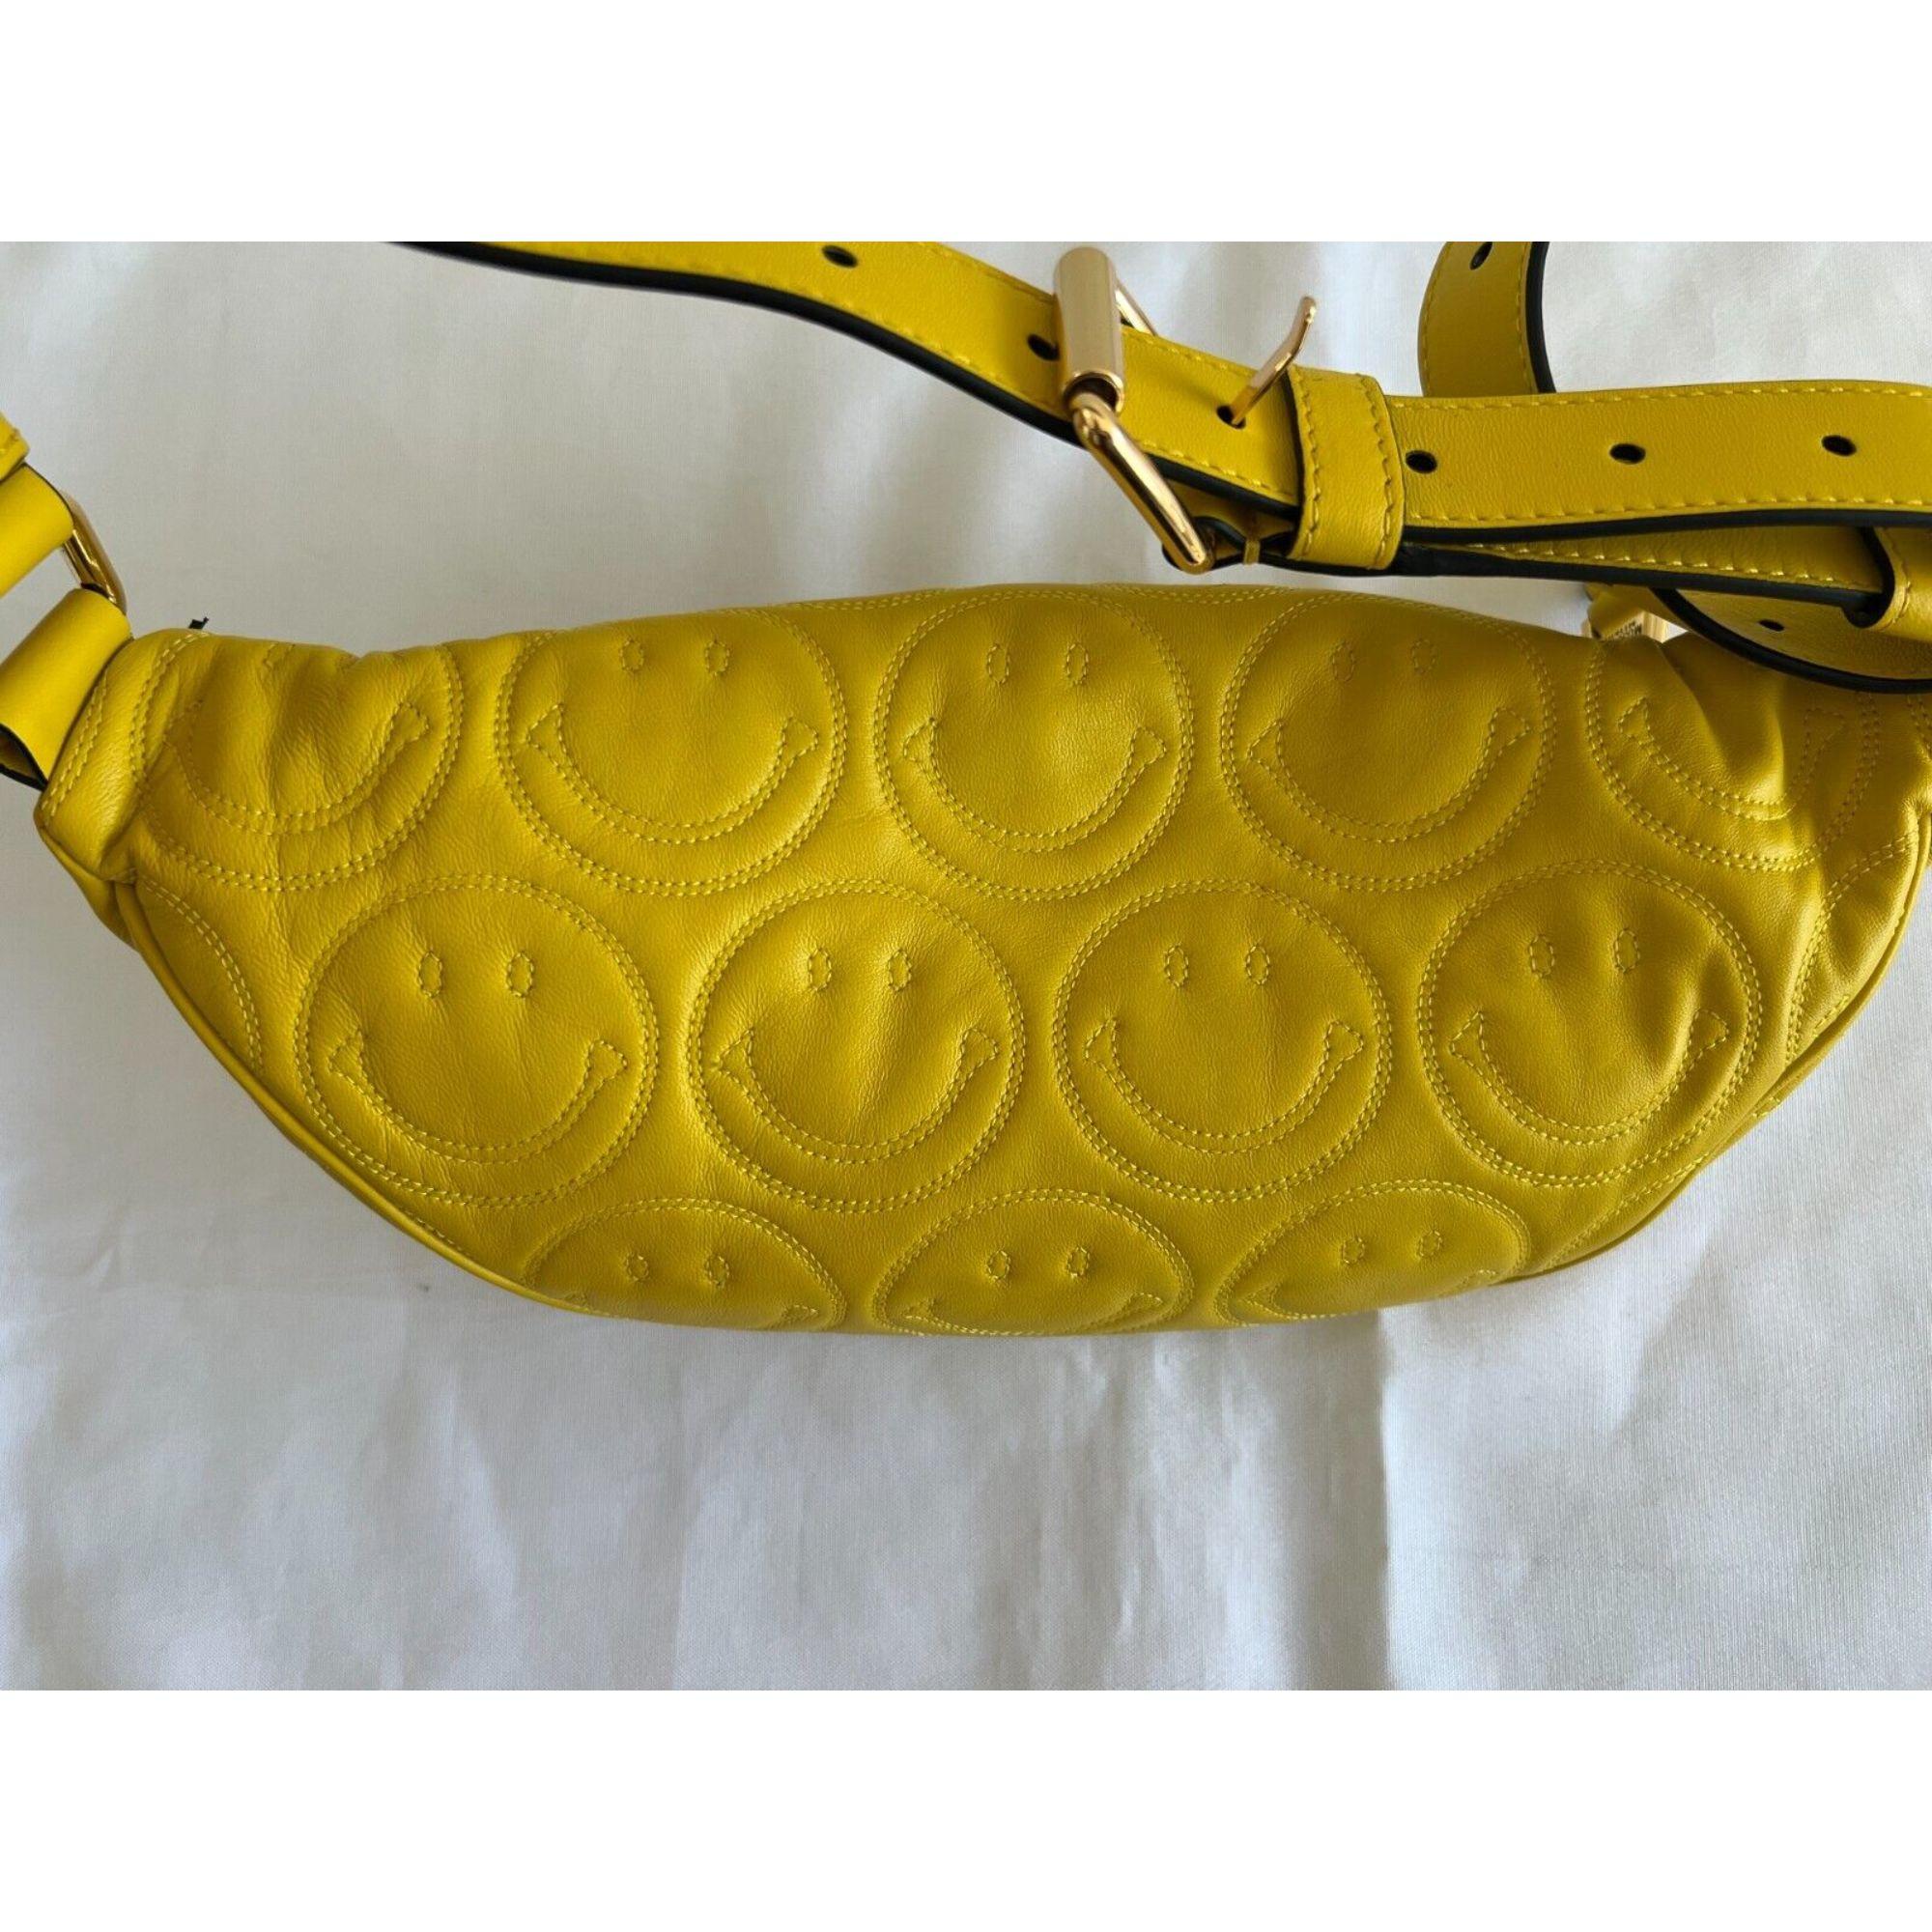 SS21 Moschino Couture Yellow Fanny Pack with Engraved Smiley by Jeremy Scott For Sale 2